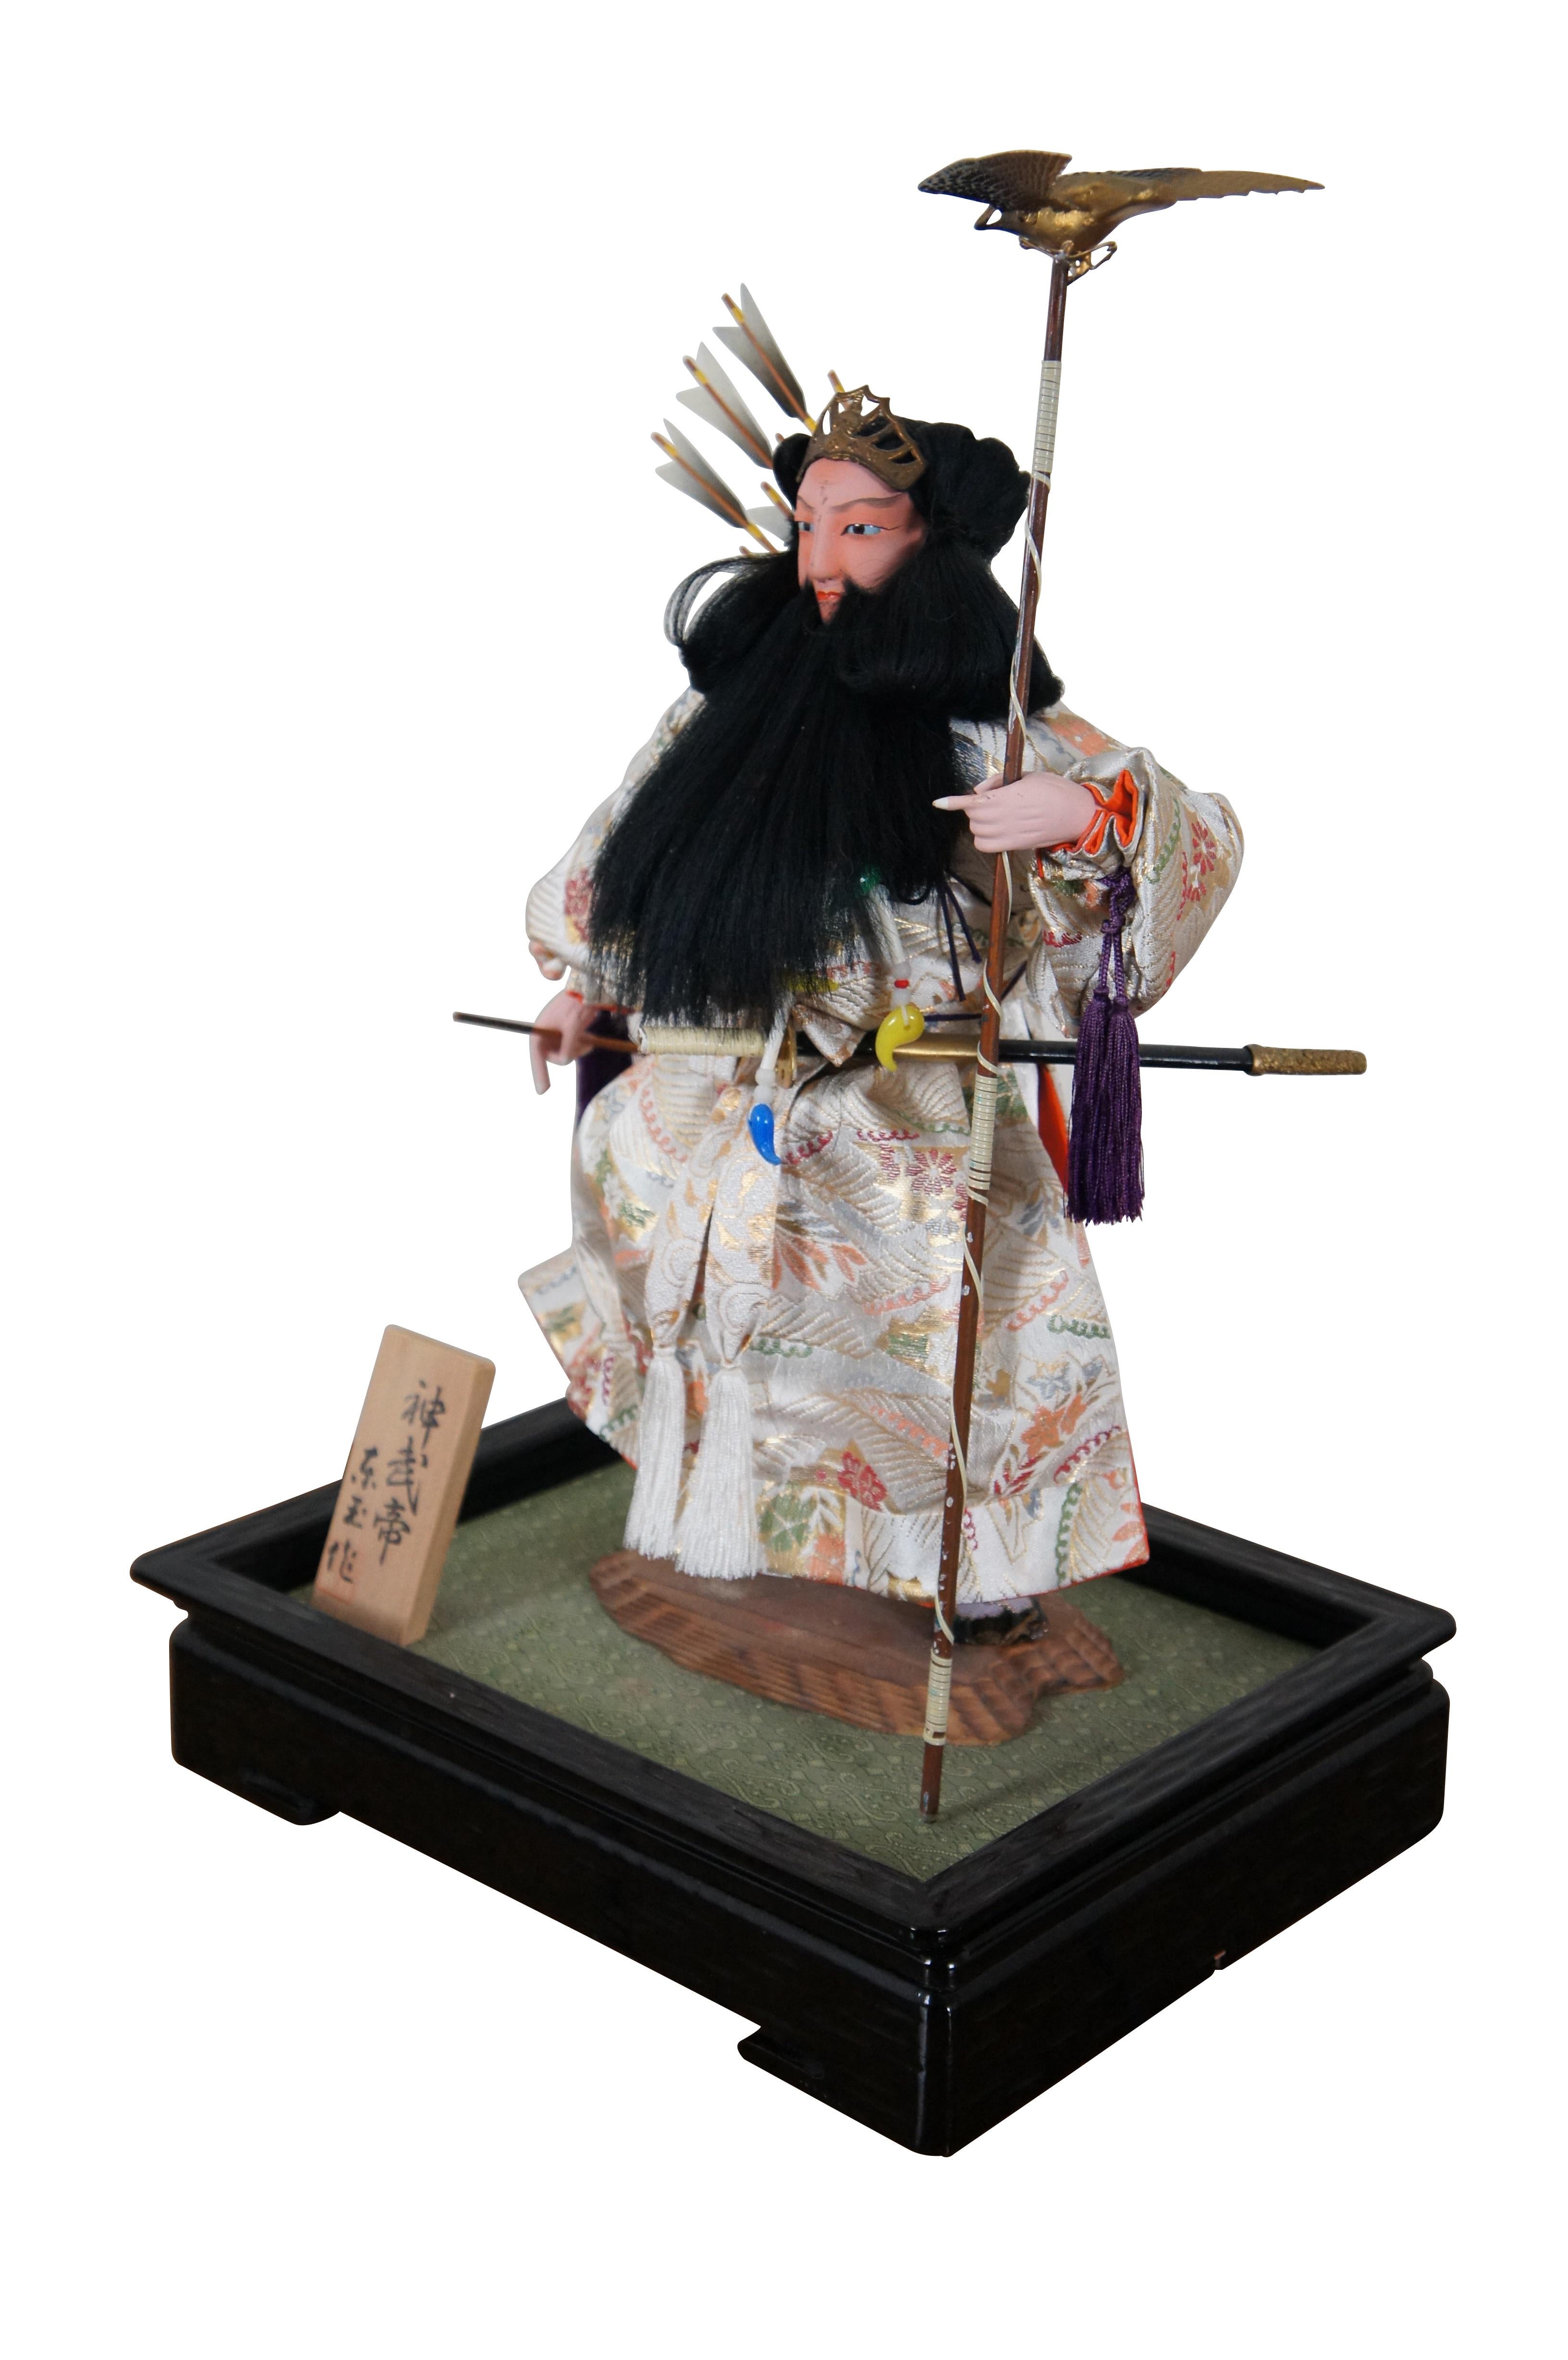 Vintage doll / figurine portraying Jinmu Tenno – Japan’s legendary first emperor. The doll is crafted with un-glazed porcelain / bisque head and hands, painted features and a lovely white silk robe. The Emperor wears a quiver of arrows on his back,